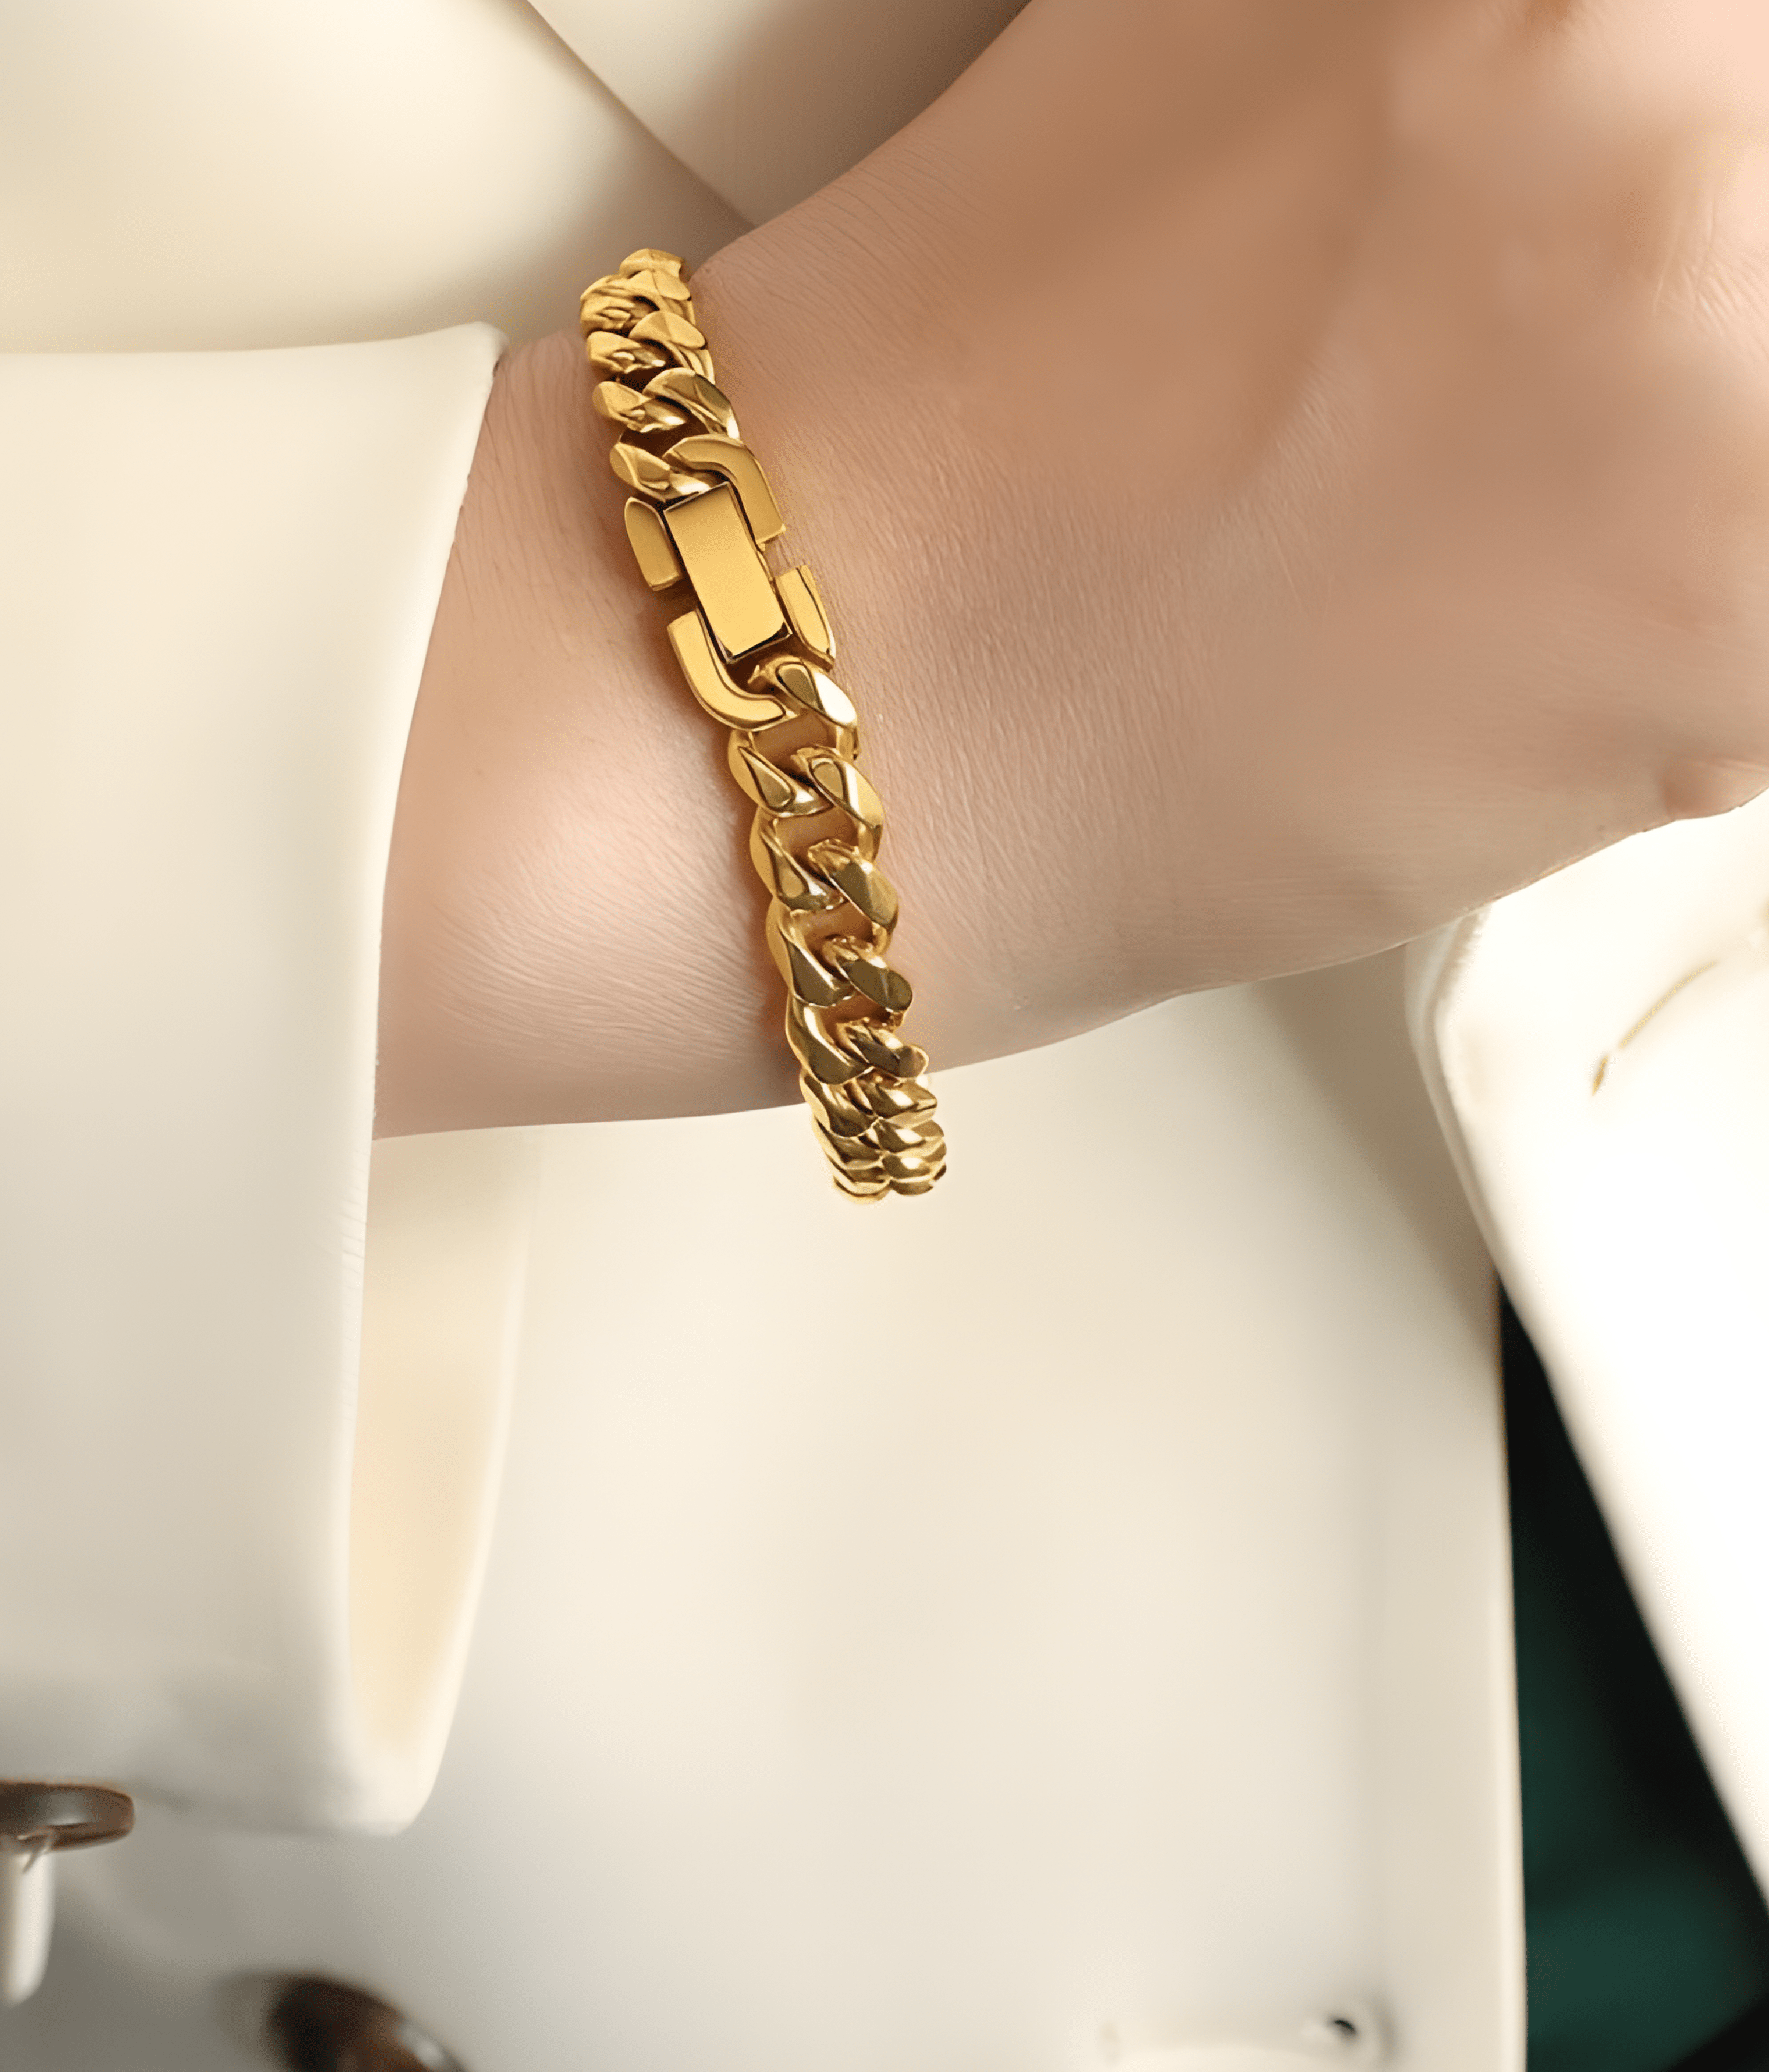 Buy Golden Chain + Bracelet + Ring with Free Watch (GCBRW2) Online at Best  Price in India on Naaptol.com